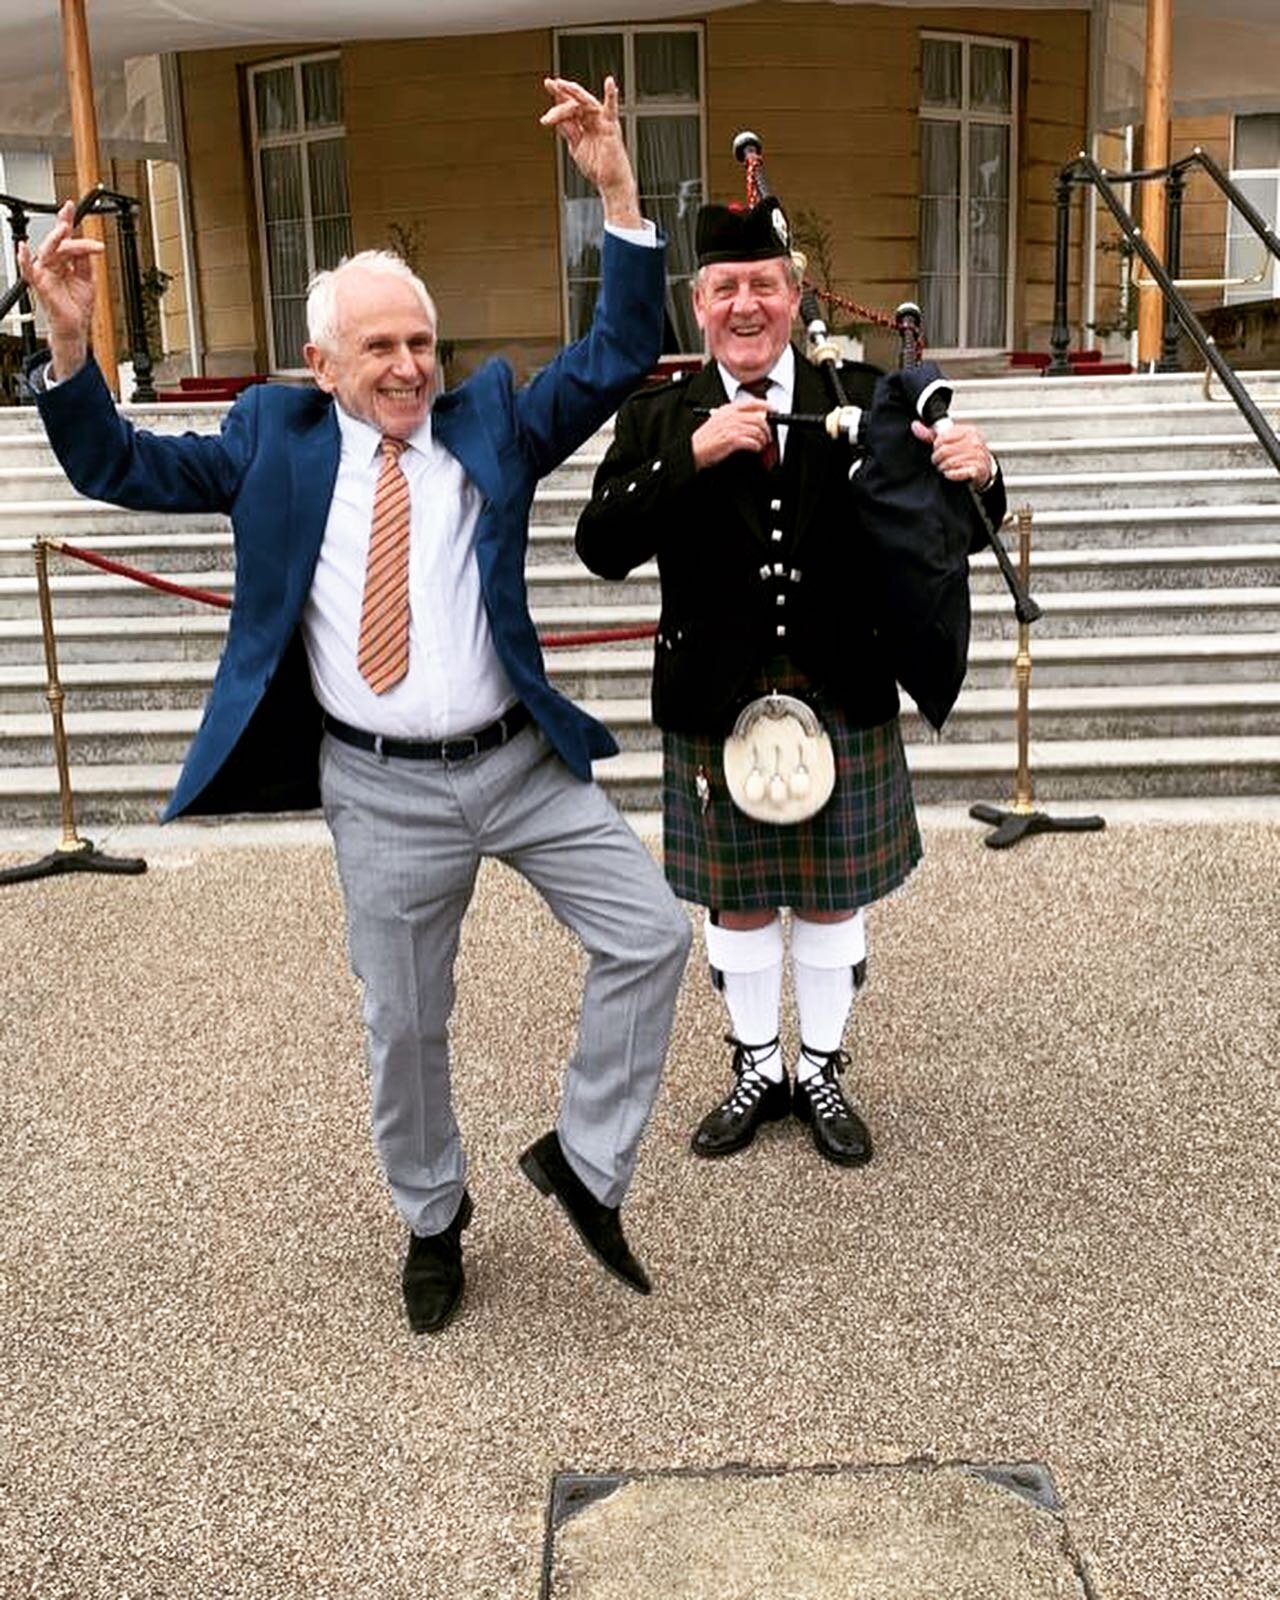 A few photos from @the.not.forgotten&rsquo;s annual Garden Party at @buckinghampalaceroyal earlier this week. A wonderful occasion, and always a pleasure to see some familiar faces! #thenotforgottenassociation #veteran #buckinghampalace